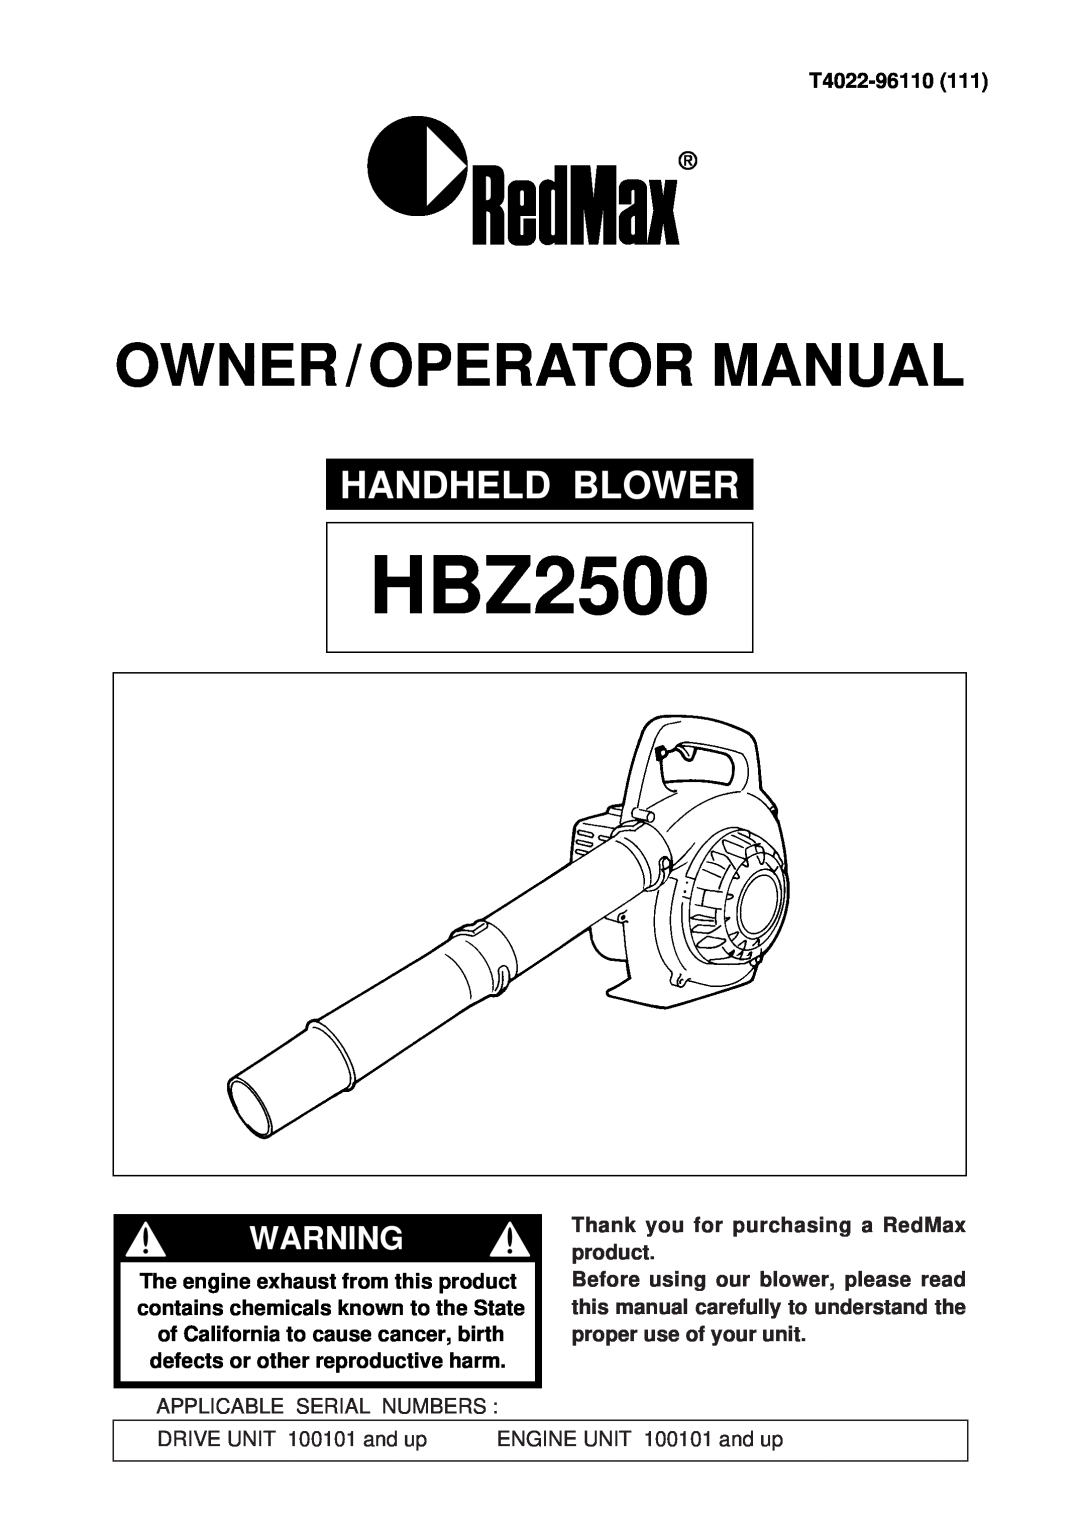 RedMax HBZ2500 manual Handheld Blower, Owner / Operator Manual, T4022-96110, Thank you for purchasing a RedMax product 